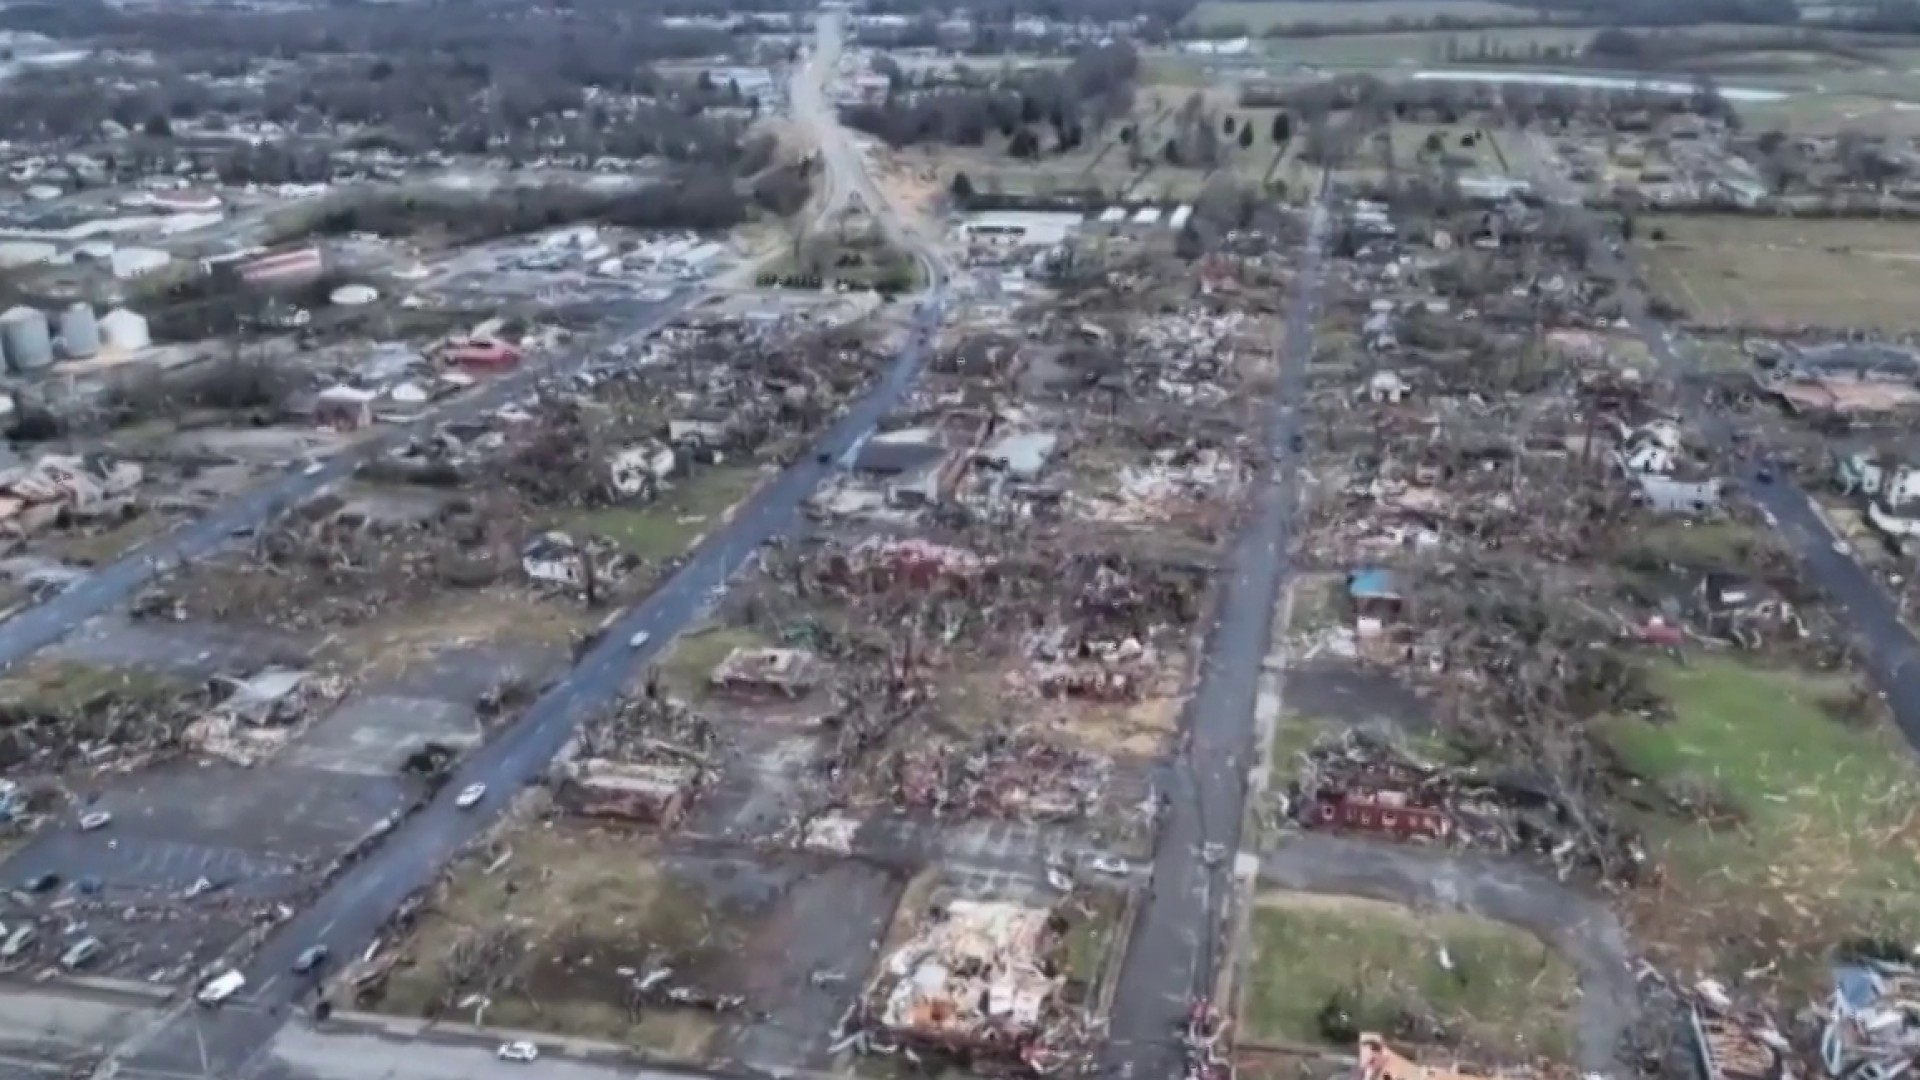 Kentucky Gov. Beshear: Tornado death toll is north of 70, may exceed 100